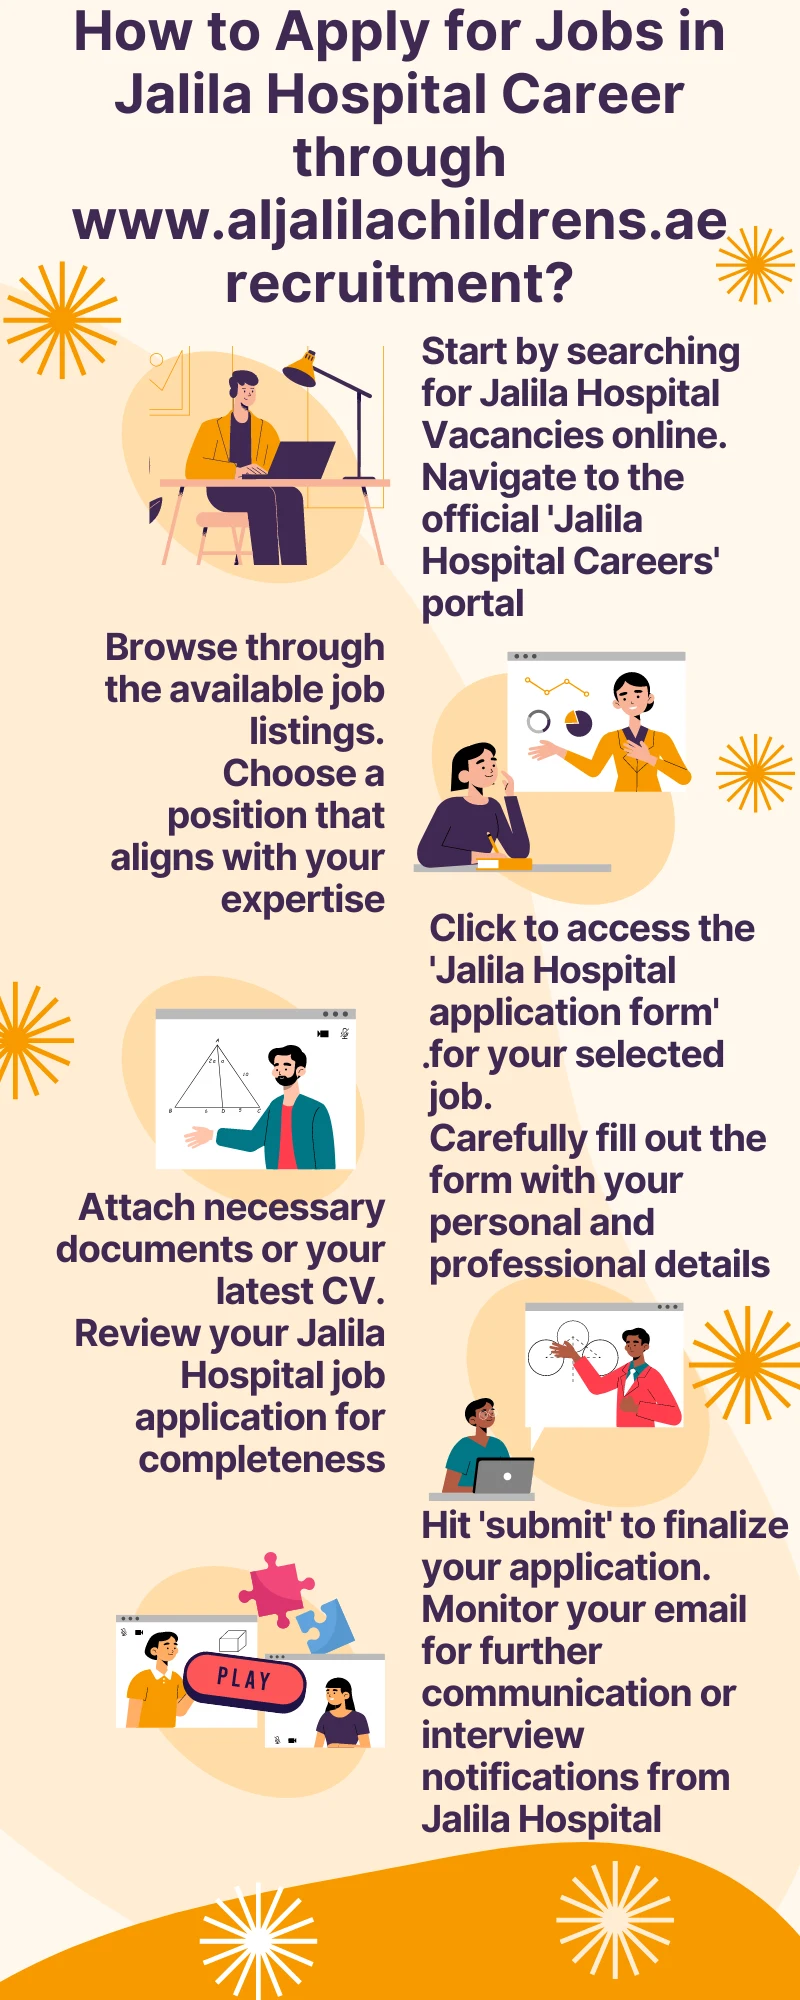 How to Apply for Jobs in Jalila Hospital Career through www.aljalilachildrens.ae recruitment?